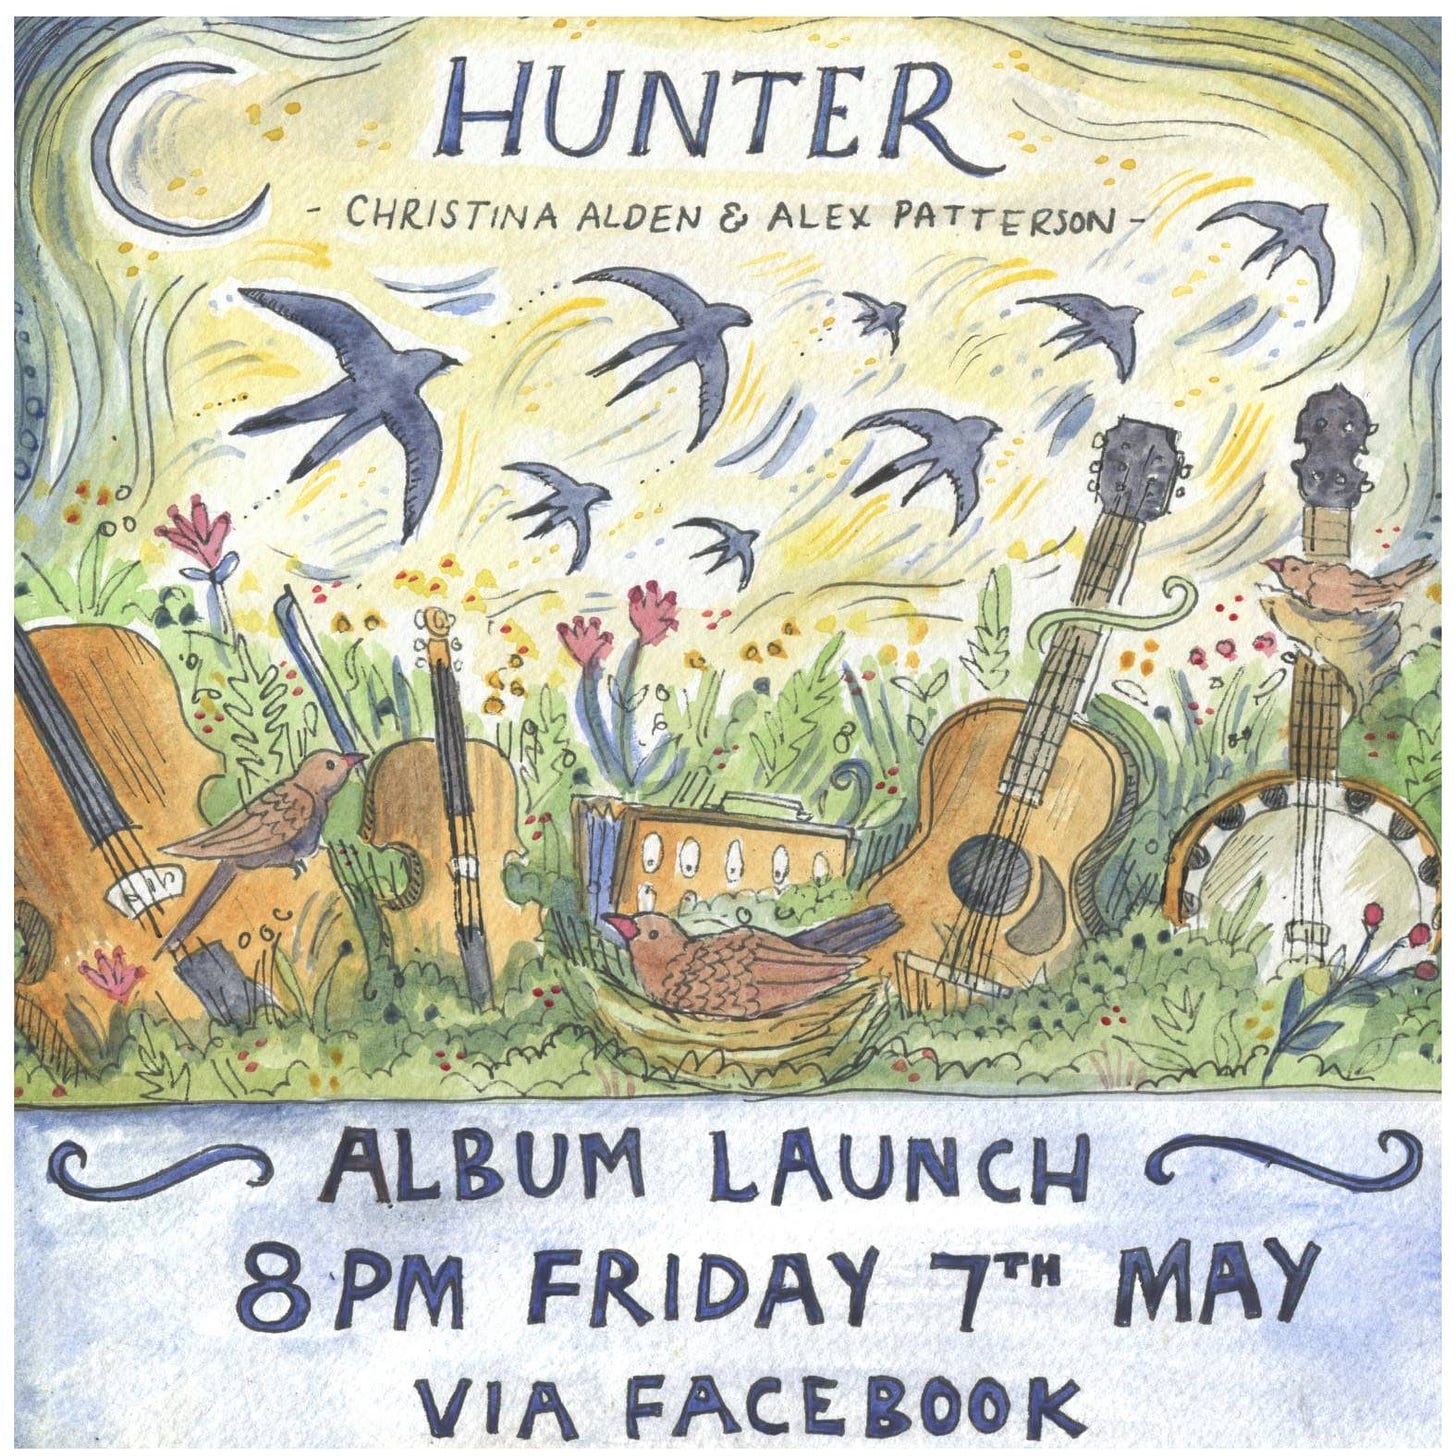 May be an image of text that says "HUNTER CHRISTINA ALDEN & ALEX PATTERSON ALBUM LAUNCH 8 PM FRIDAY ××× MAY VIA FACEBOOK"